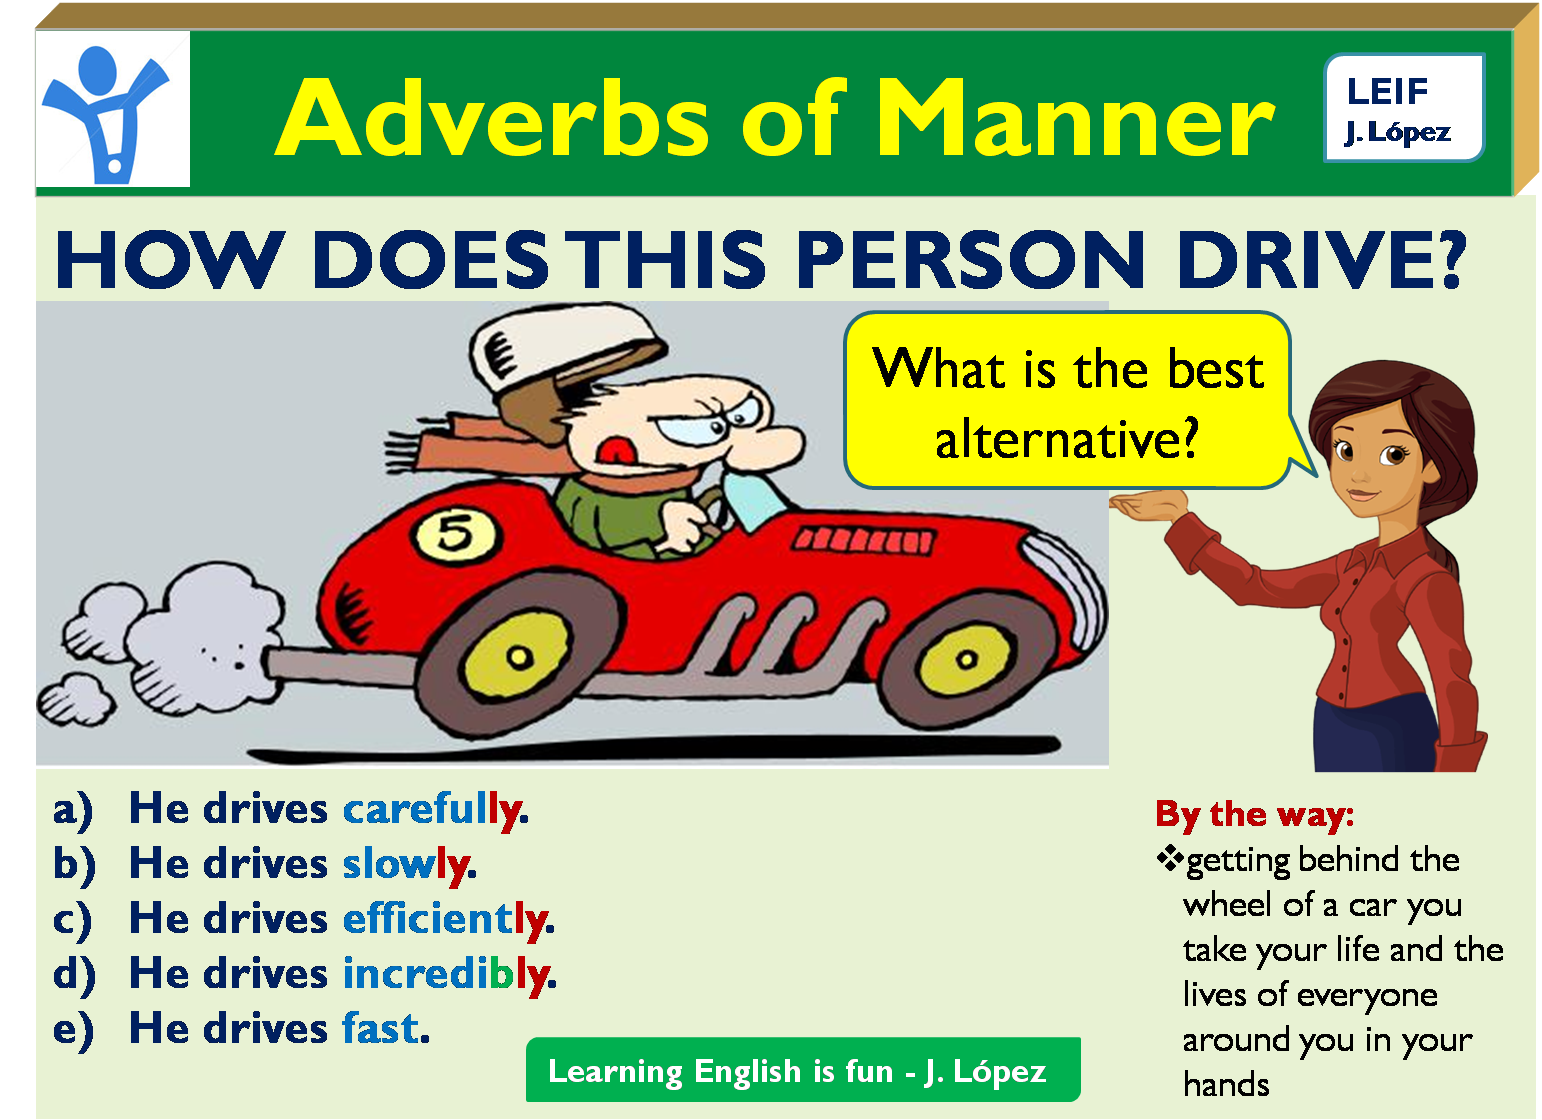 Adverbs of manner правило. Adverbs of manner правила. Adjectives adverbs of manner. Adverbs правила. Be quickly перевод